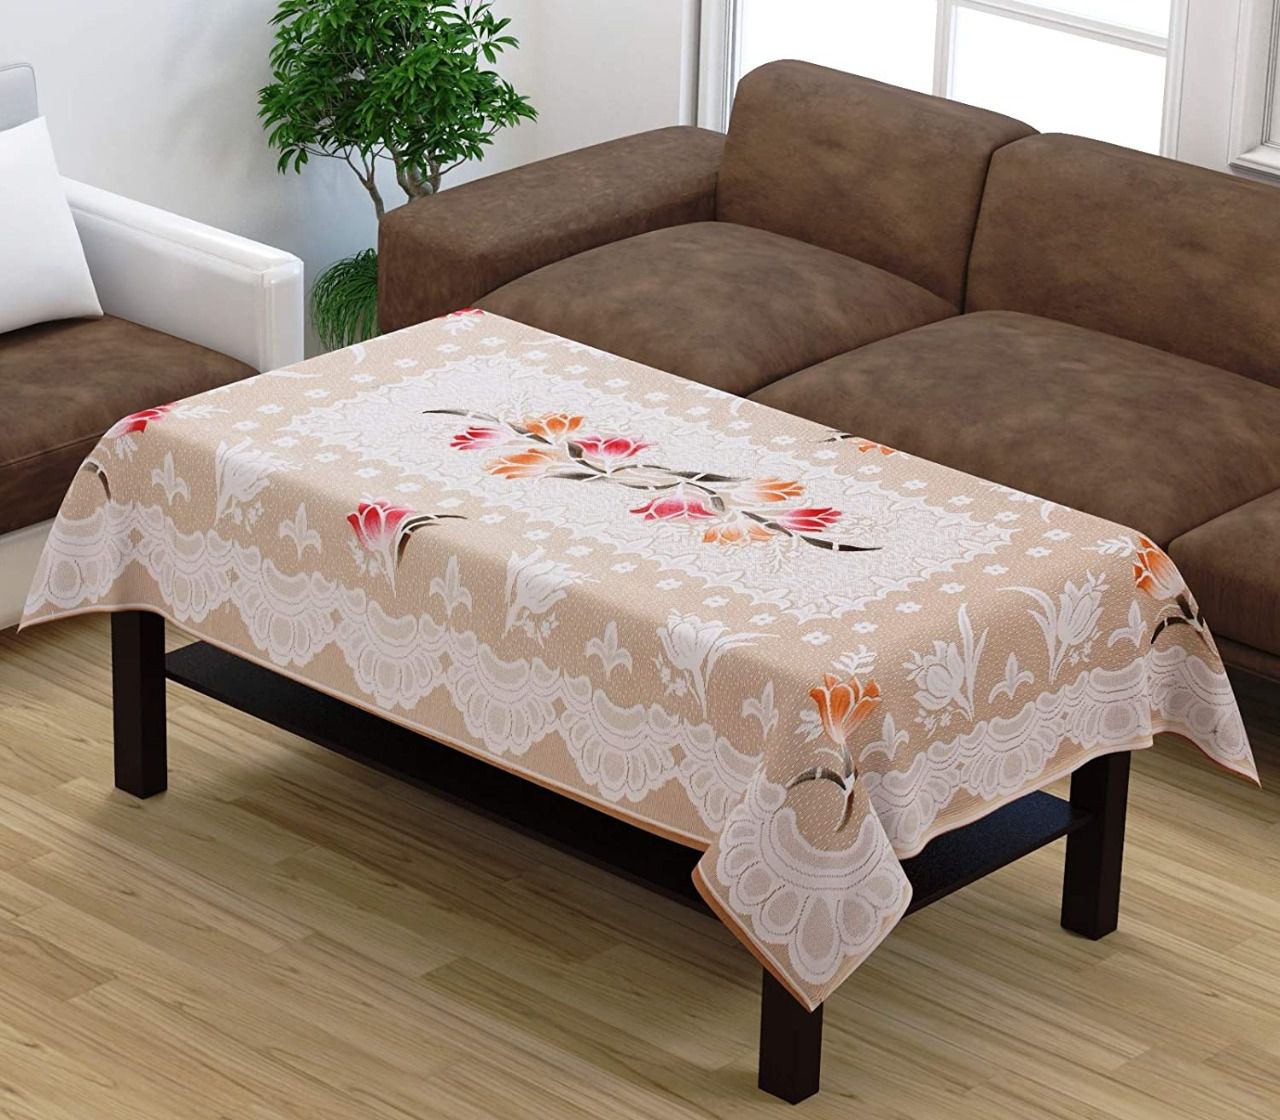 Dakshya Industries Floral Polyster 4 Seater Center Table Cover (Cream - 40x60 Inches)